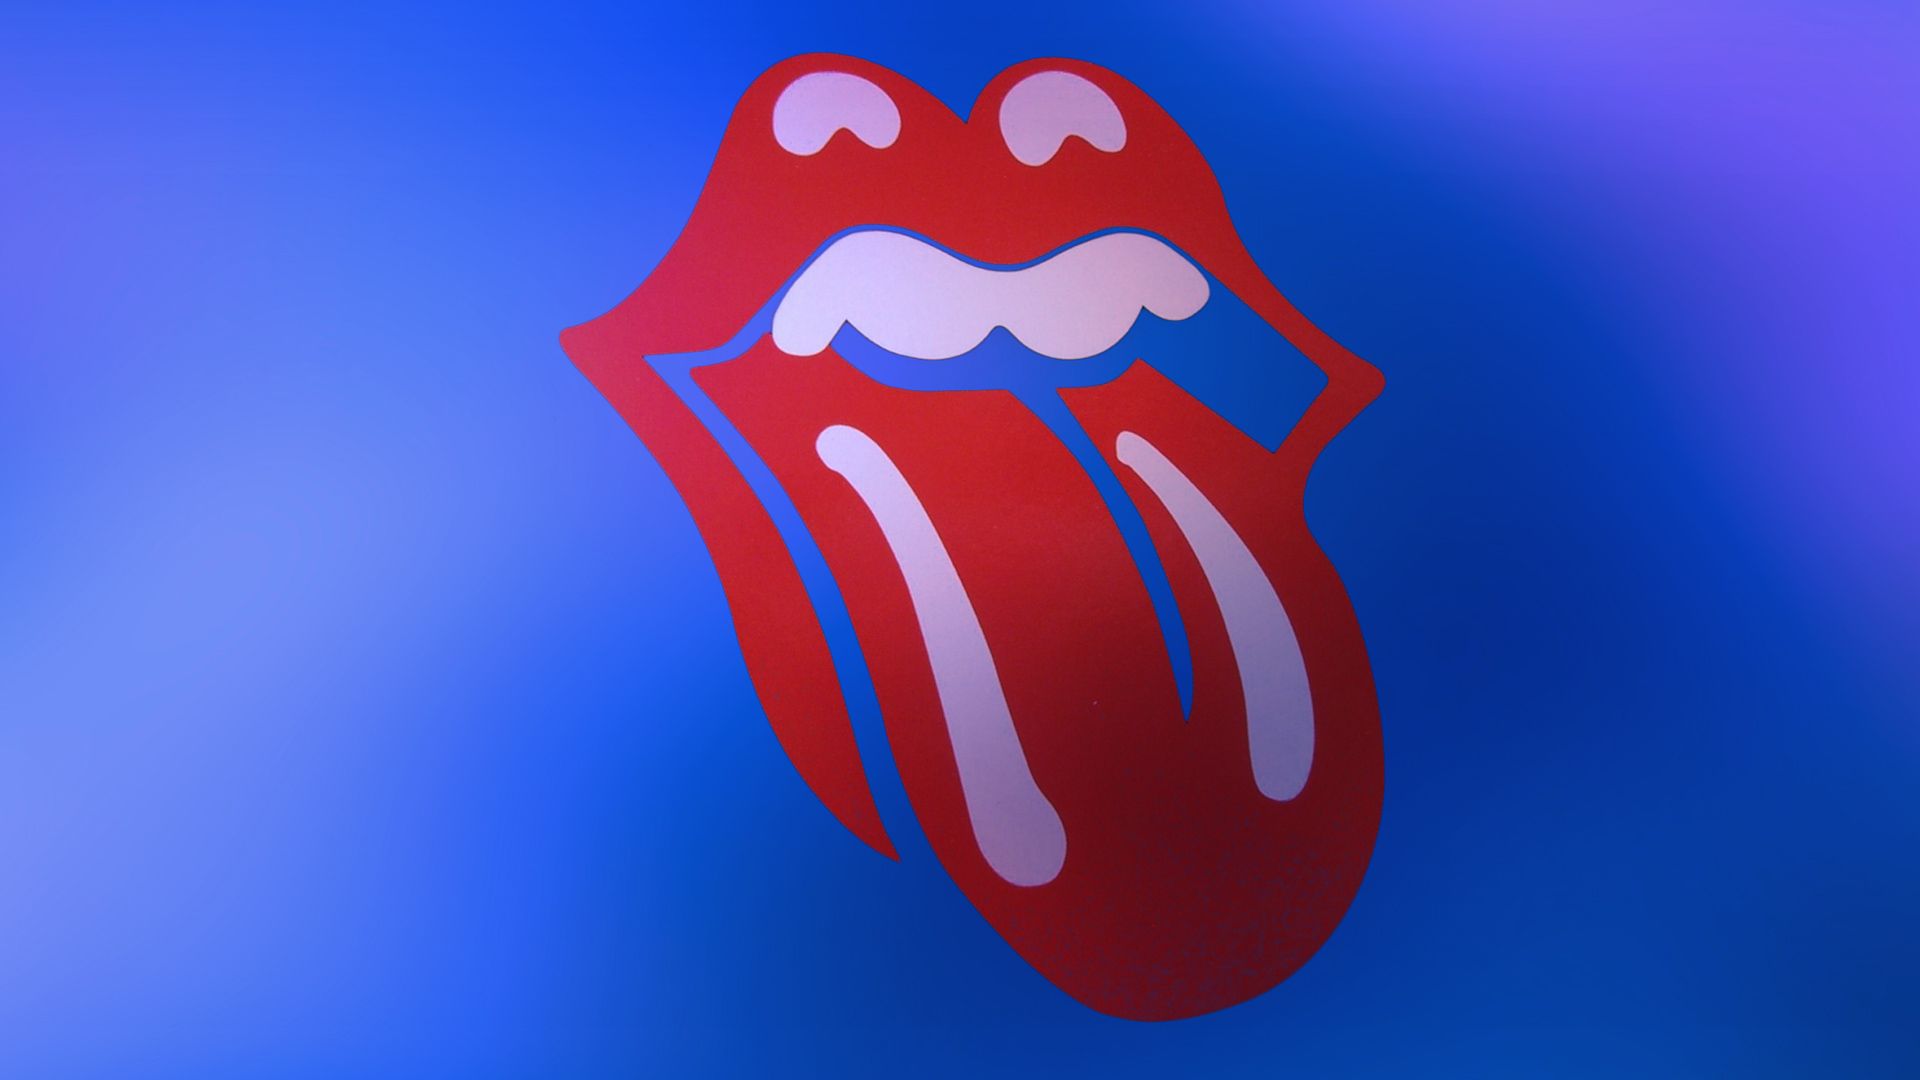 Rolling Stones Wallpaper Group